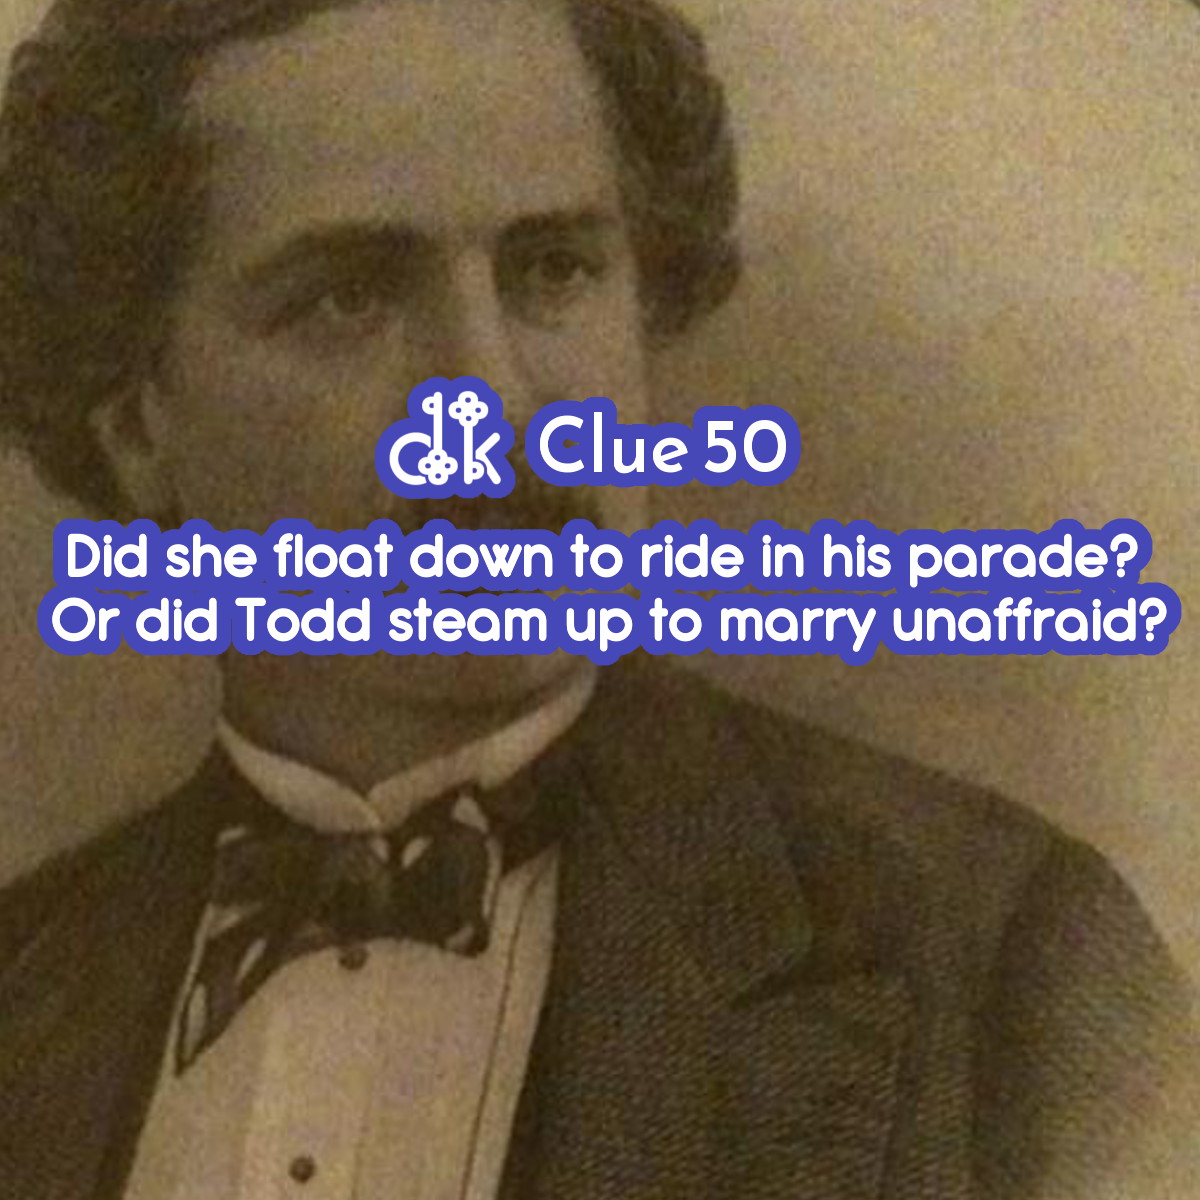 Clue #50 - Did she float down to ride in his parade? Or did Todd steam up to marry unaffraid.